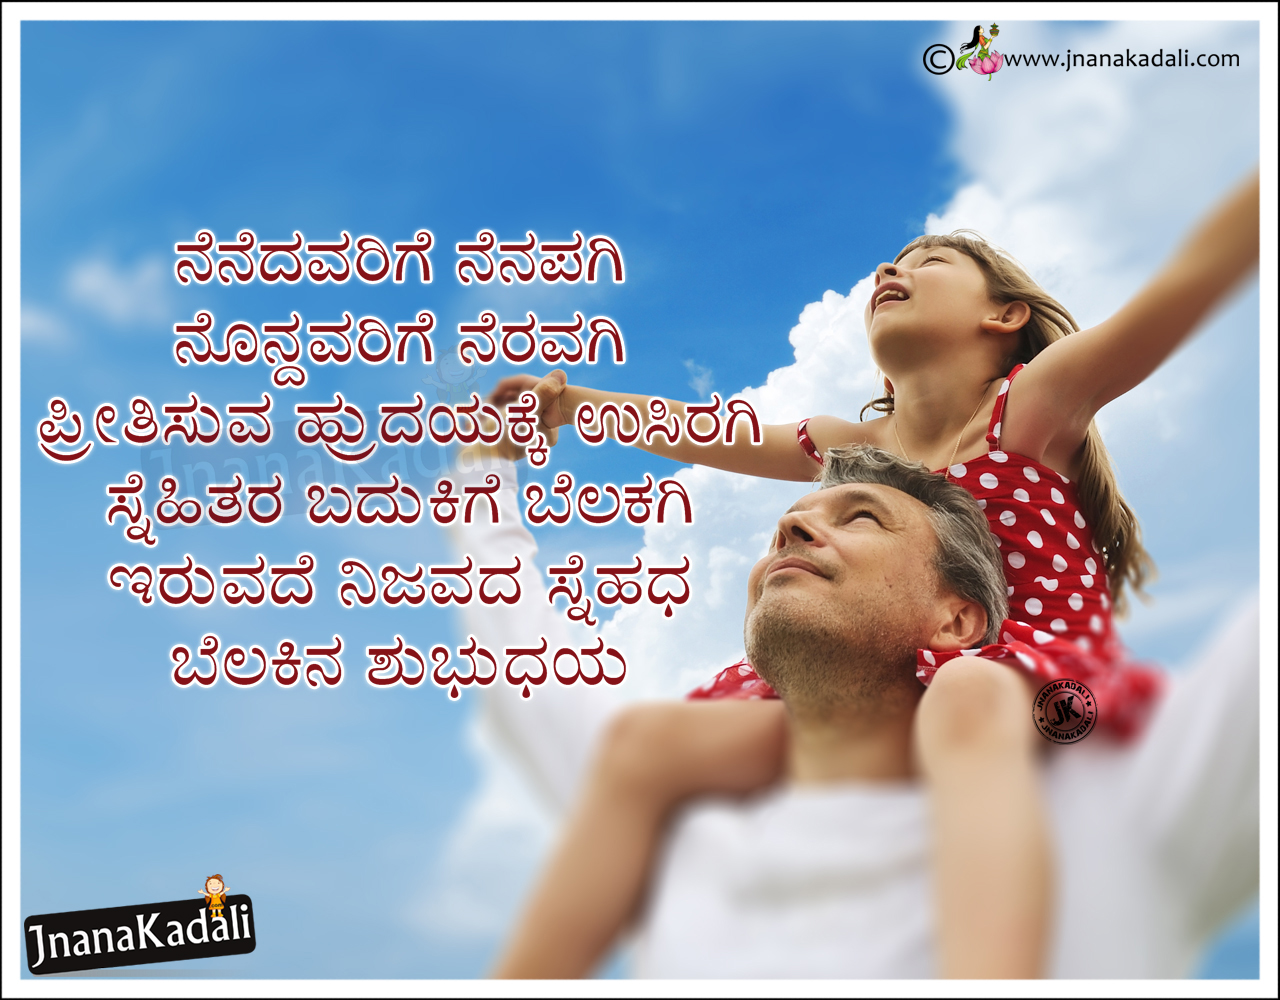 kannada wallpapers free download,text,fun,font,happy,photography